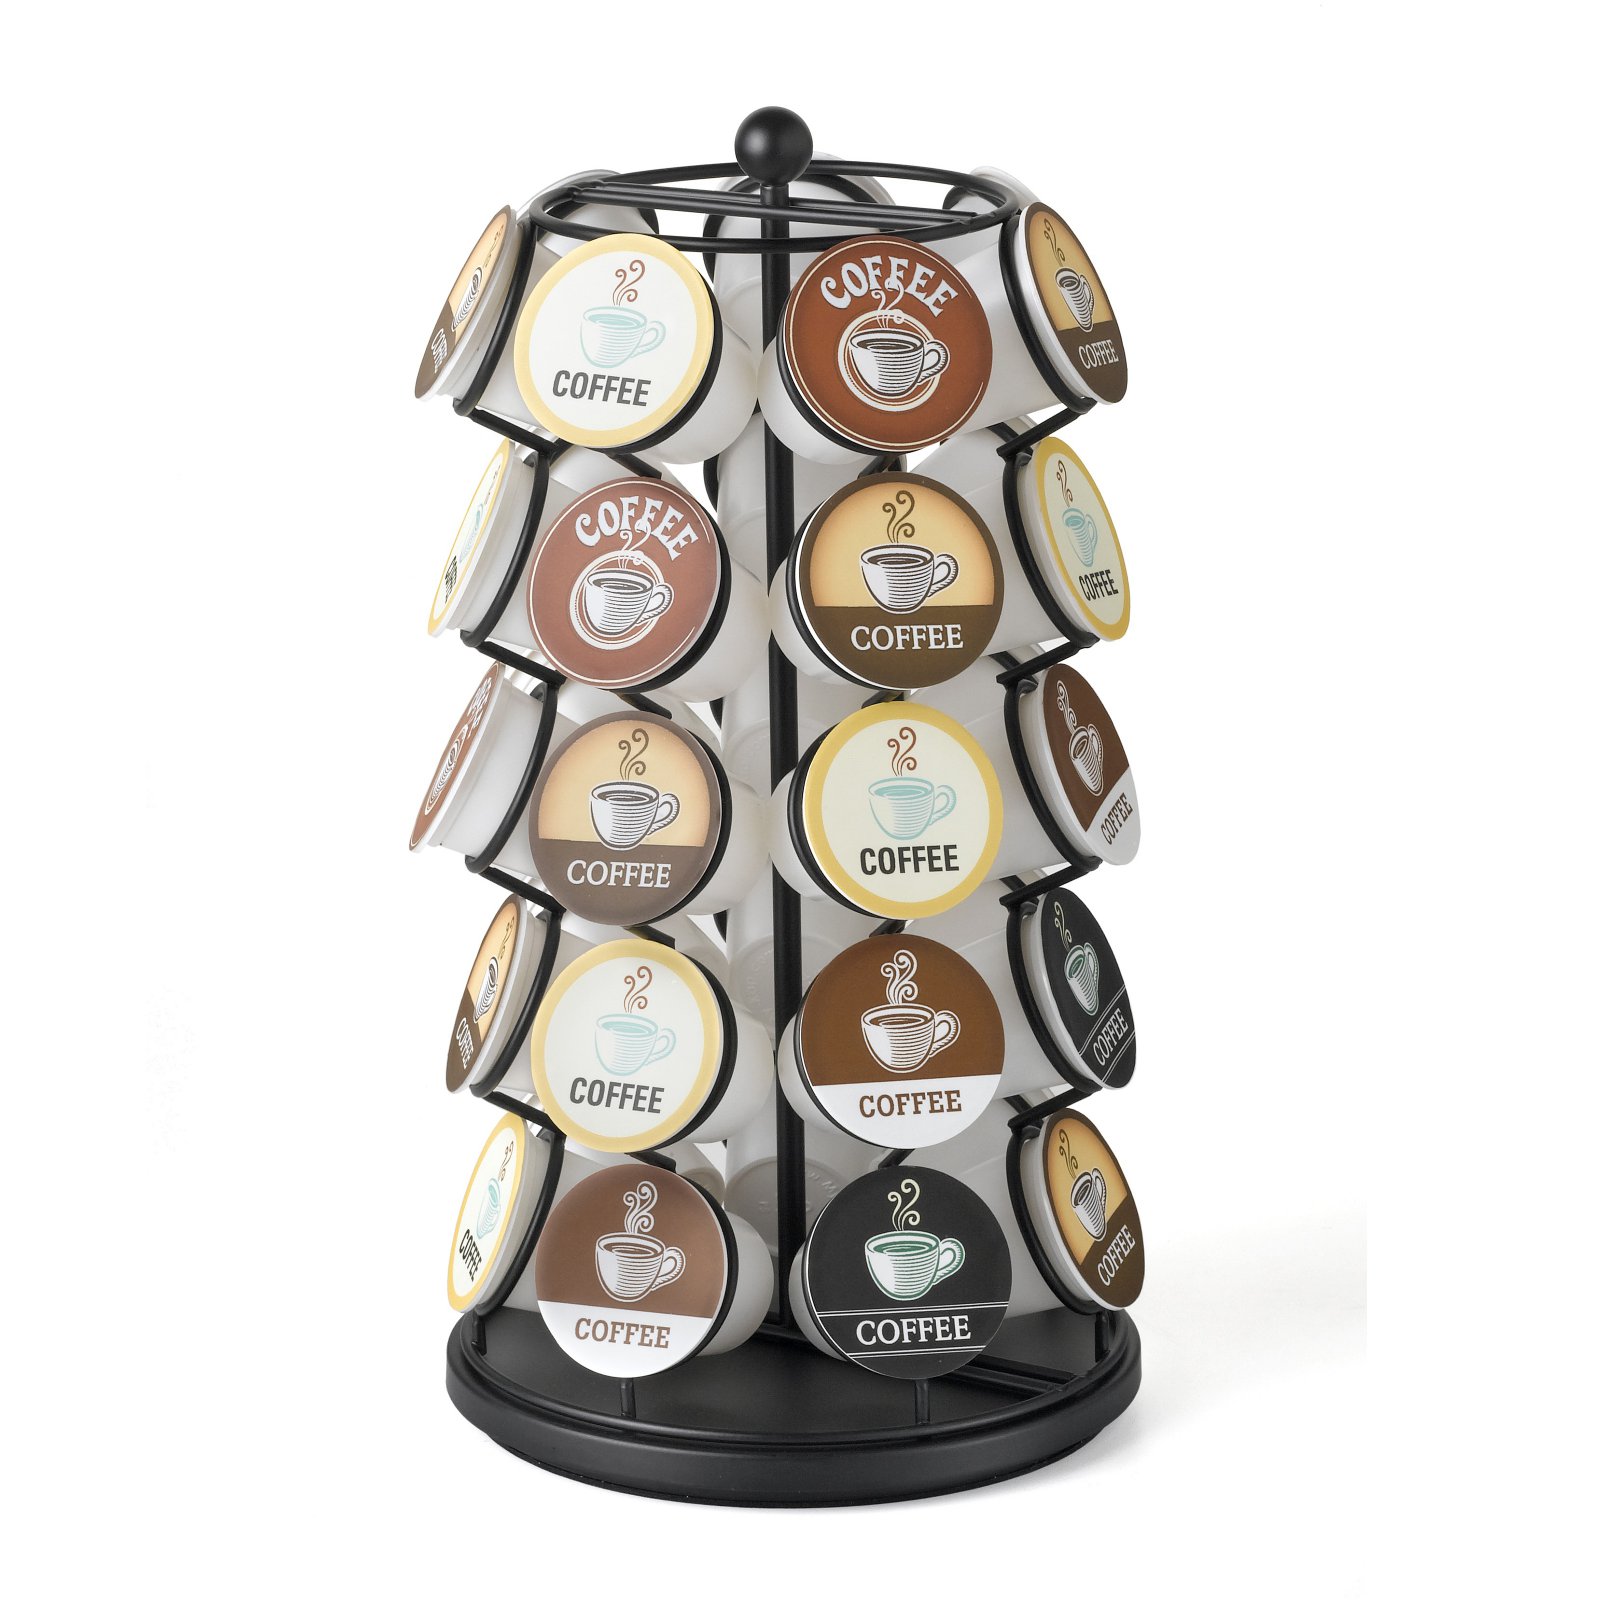 Nifty Solutions Coffee Pod Carousel – Compatible with K-Cups, 35 Pod Capacity, Black - image 1 of 9